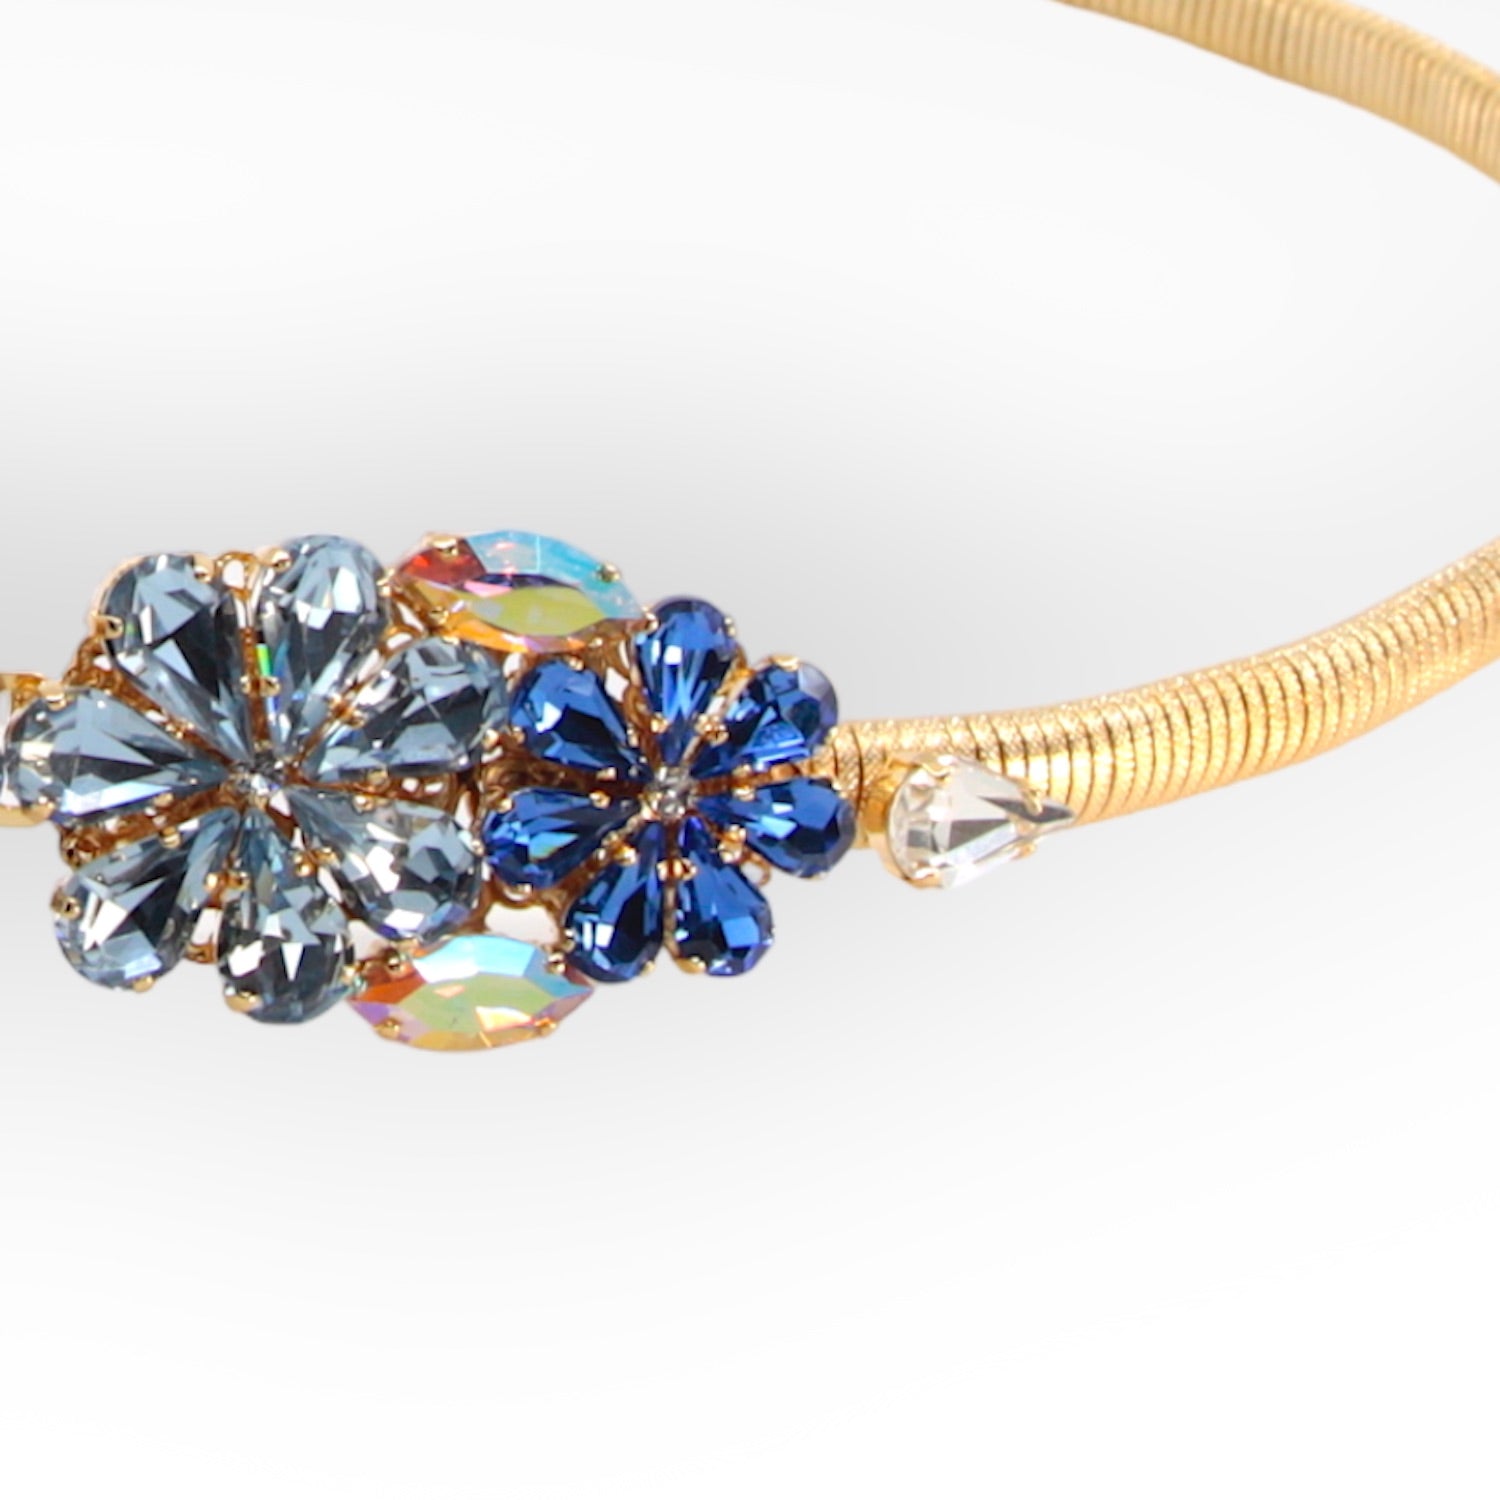 GOLD PLATED STRETCH METAL BELT WITH DAISY BUCKLE IN SAPPHIRE AND AQUAMARINE CRYSTALS